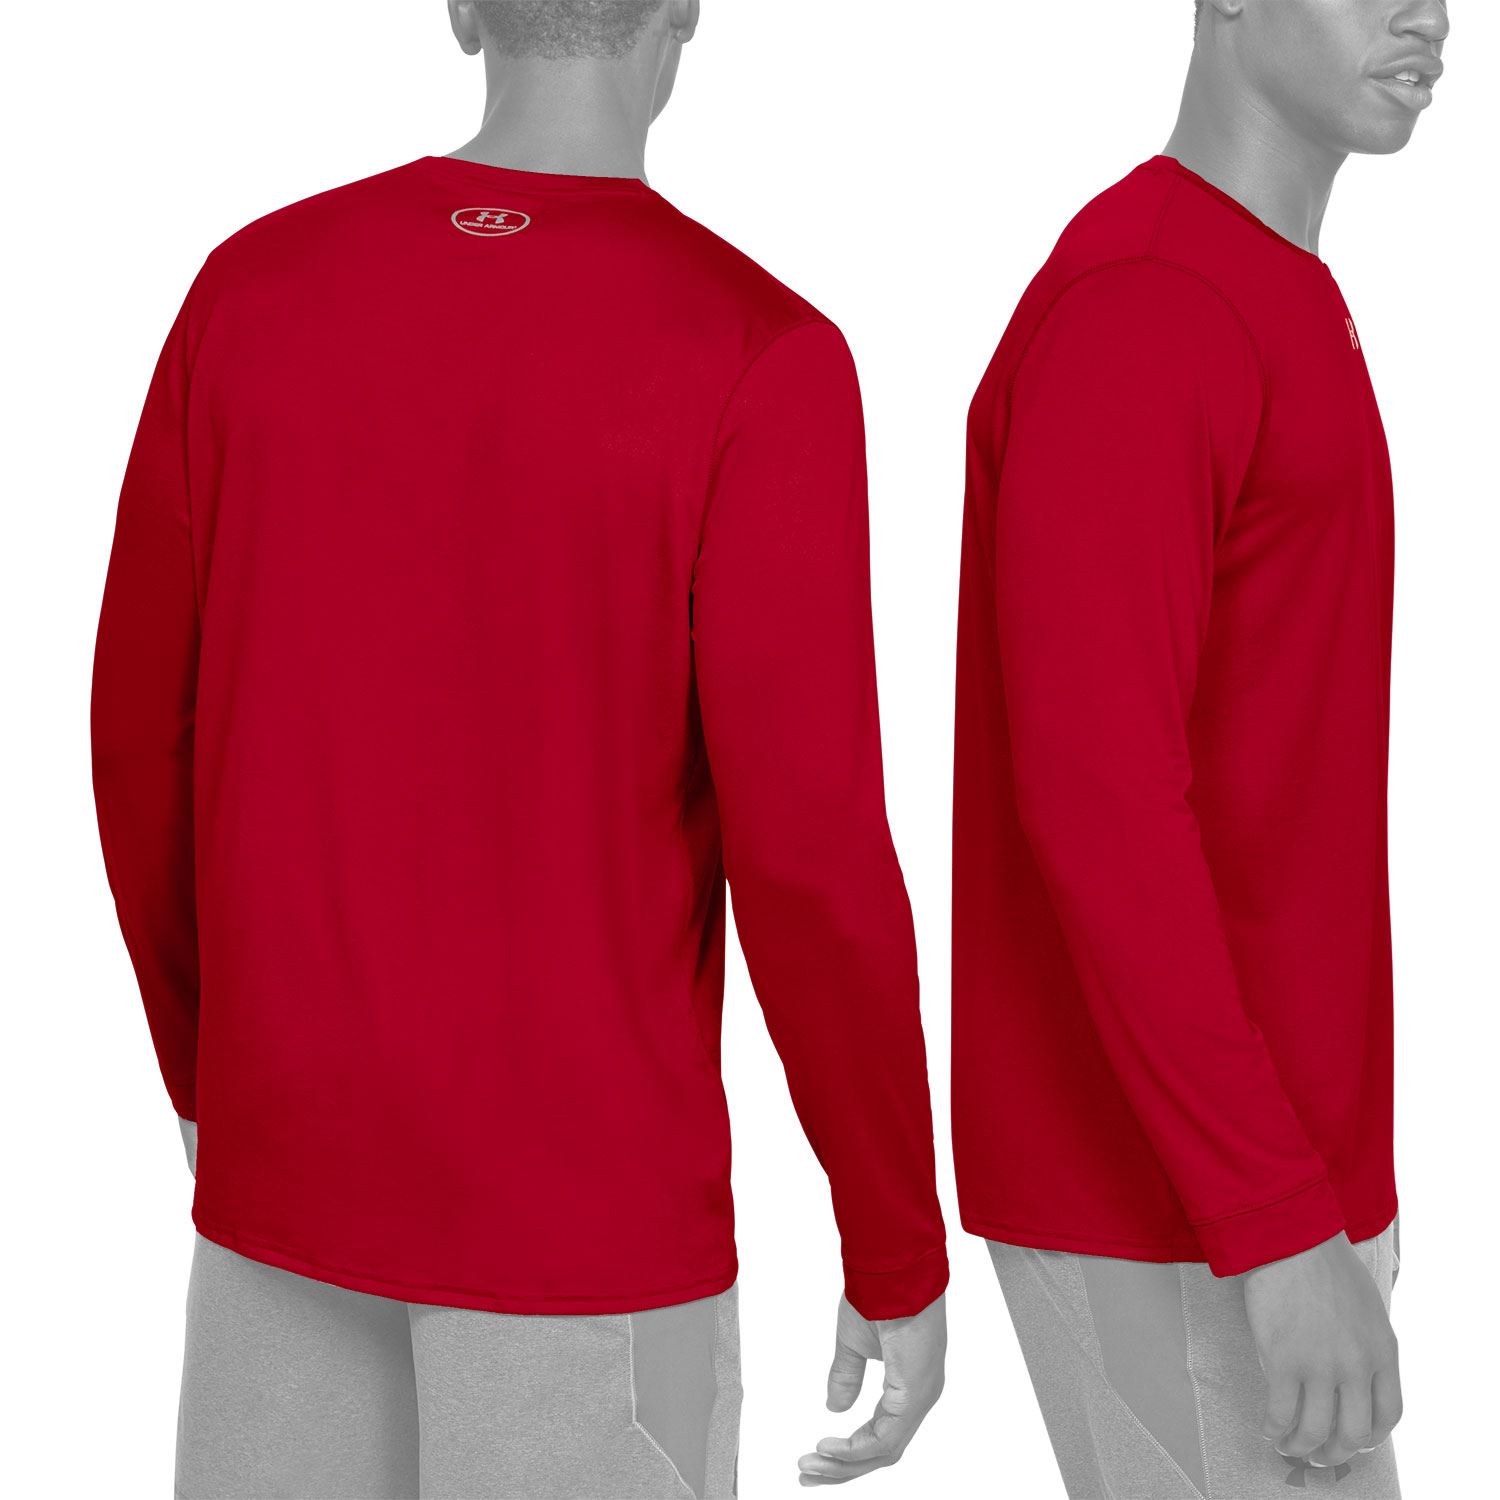 Under Armour Loose Fit Long Sleeve Shirt - Red Back & Side View